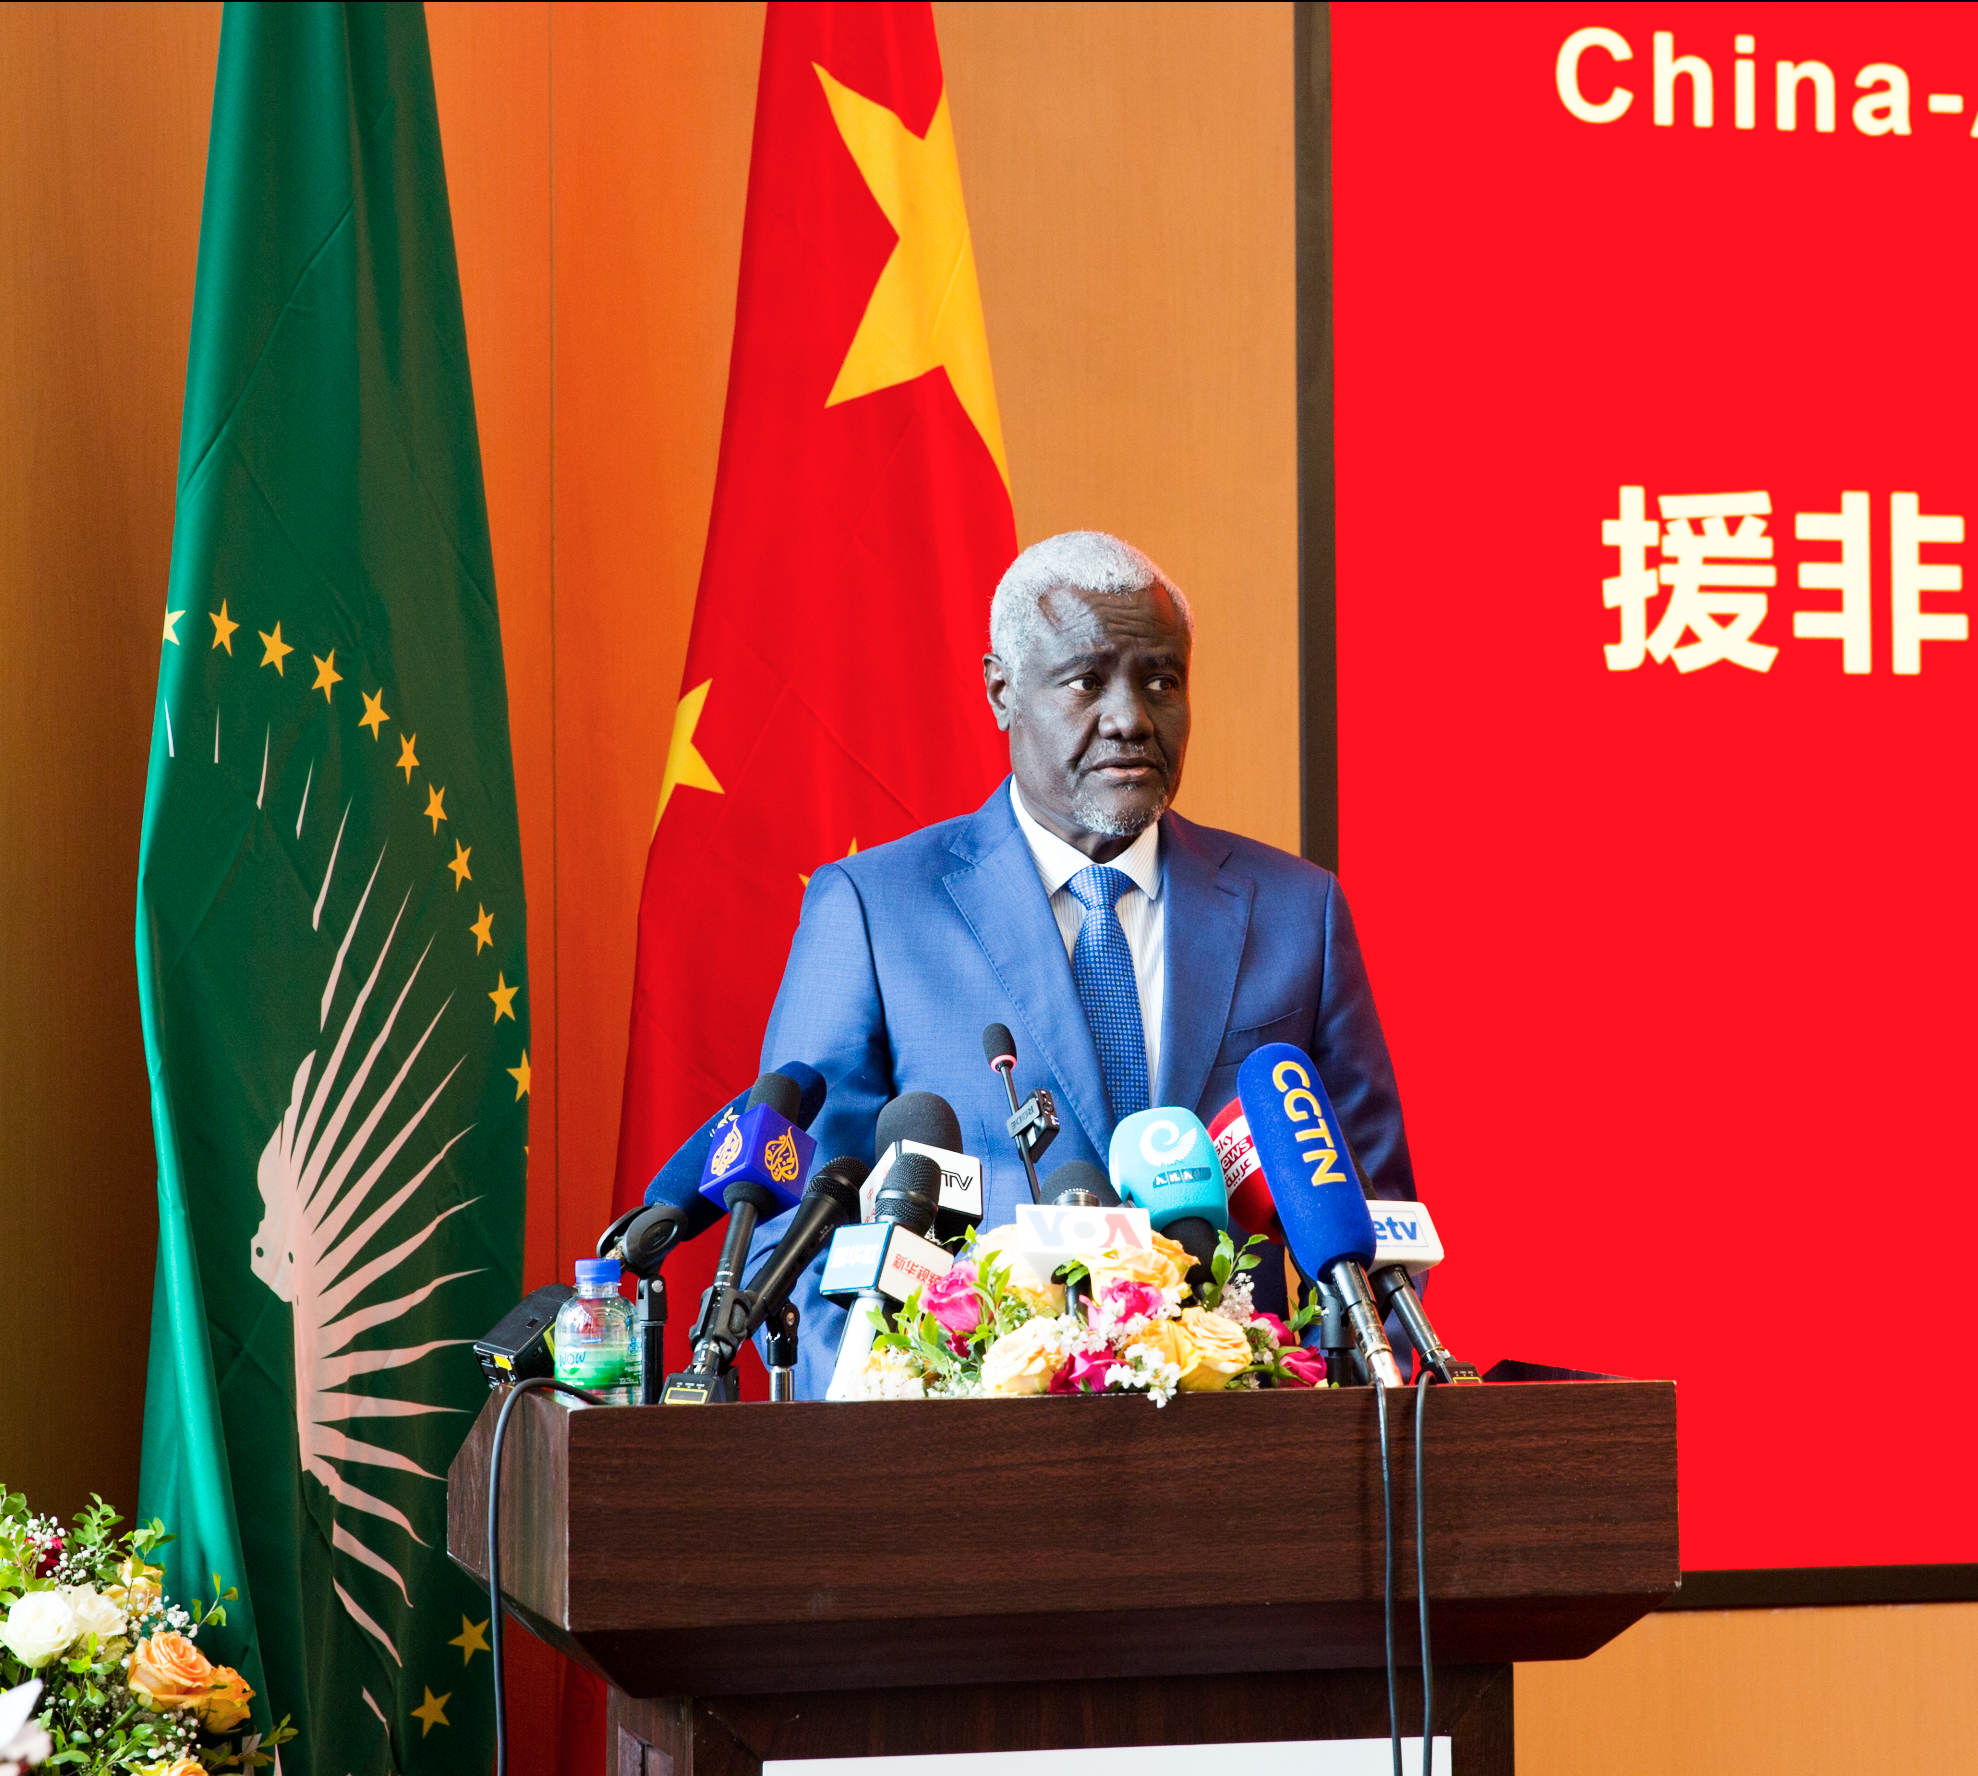 Chairperson of the African Union (AU) Commission Moussa Faki Mahamat delivers a speech at the completion ceremony for the China-aided Africa CDC Headquarters, January 11, 2023. /CGTN